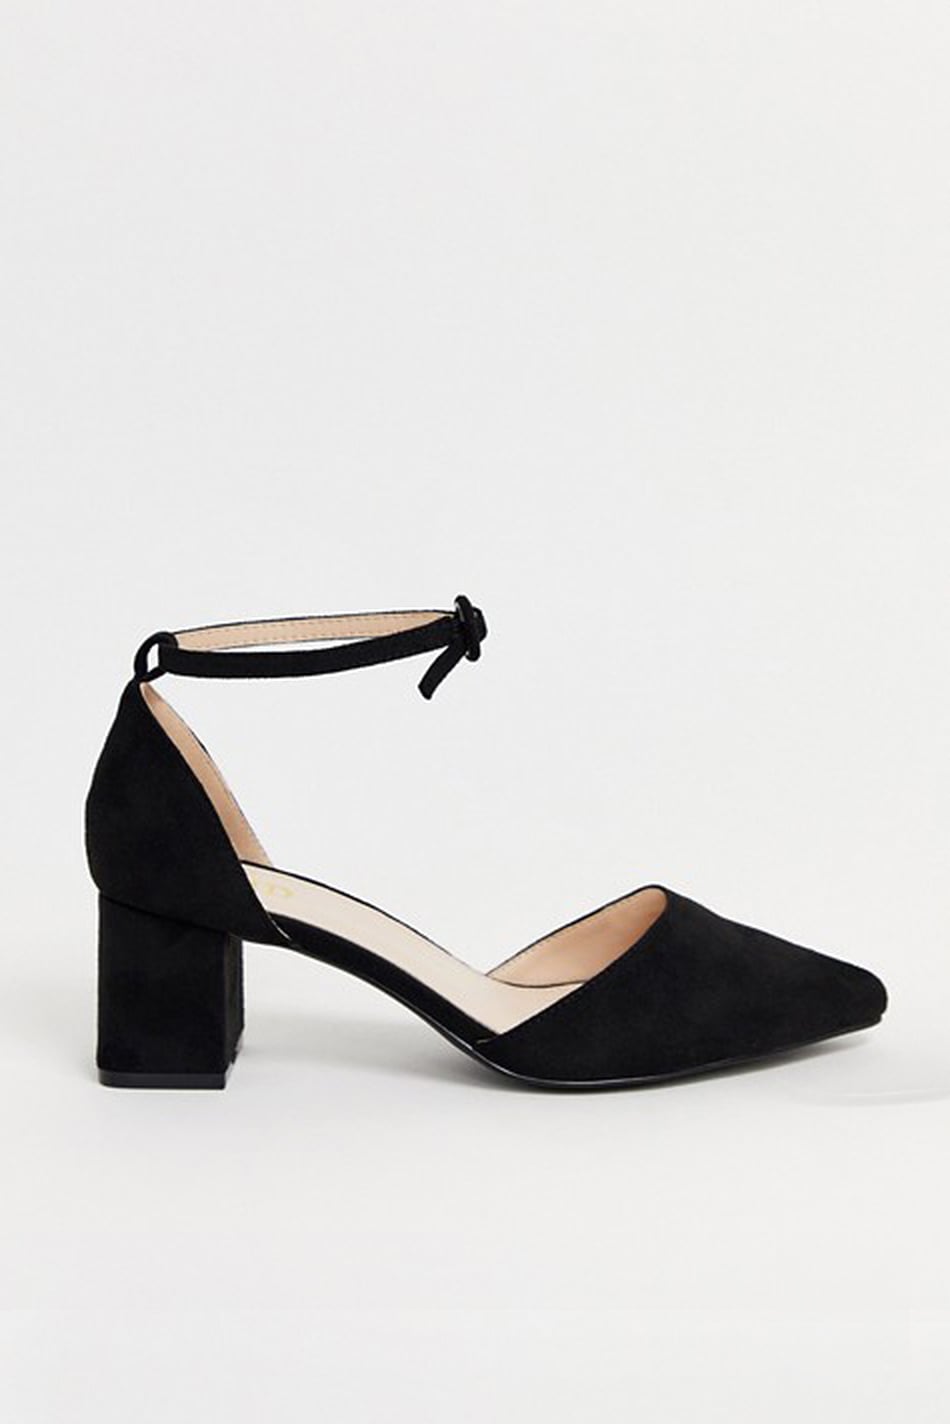 Stylish and Comfortable Heels to Wear to Work | POPSUGAR Fashion